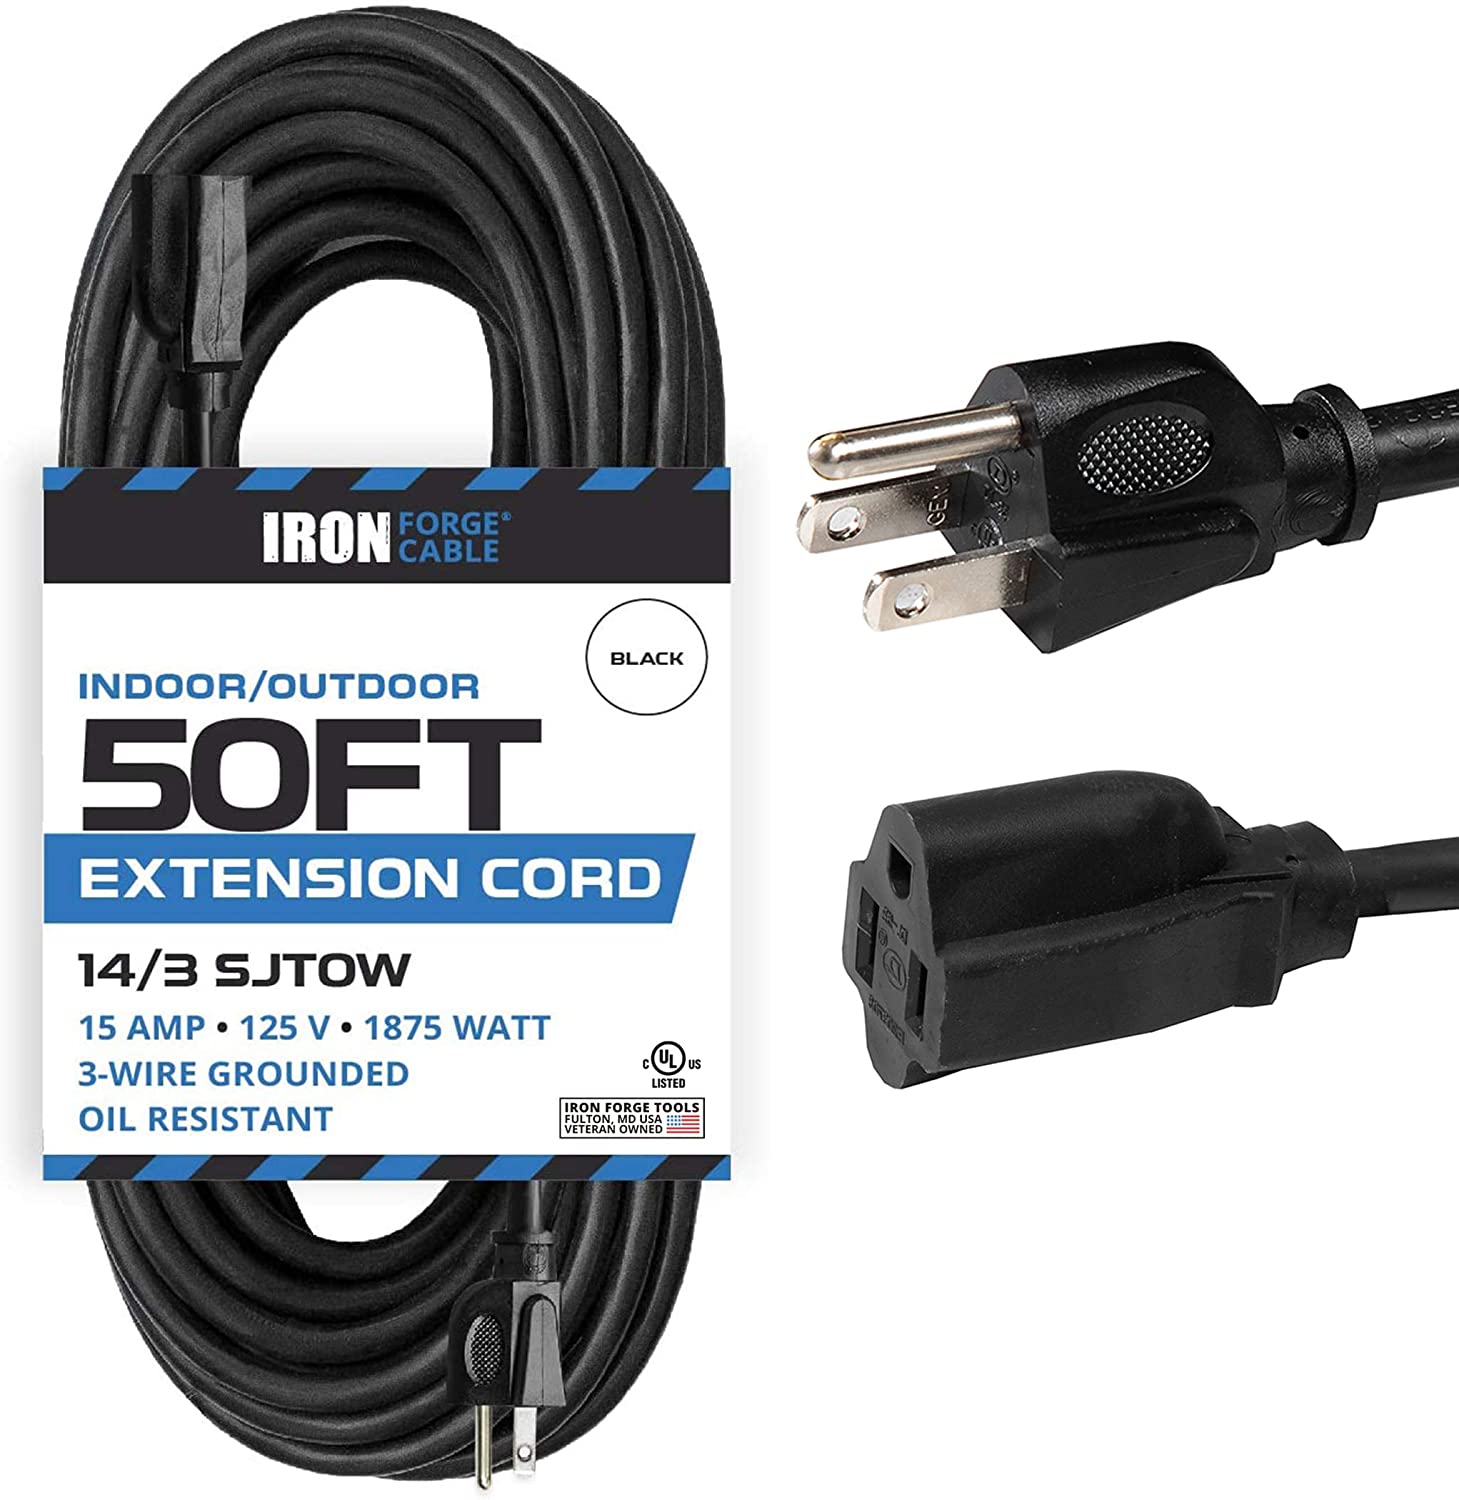 50 Ft Black Oil Resistant Extension Cord for Farms and Ranches - 14/3 SJTOW Heavy Duty Outdoor Electrical Cable with 3 Prong Grounded Plug for Safety